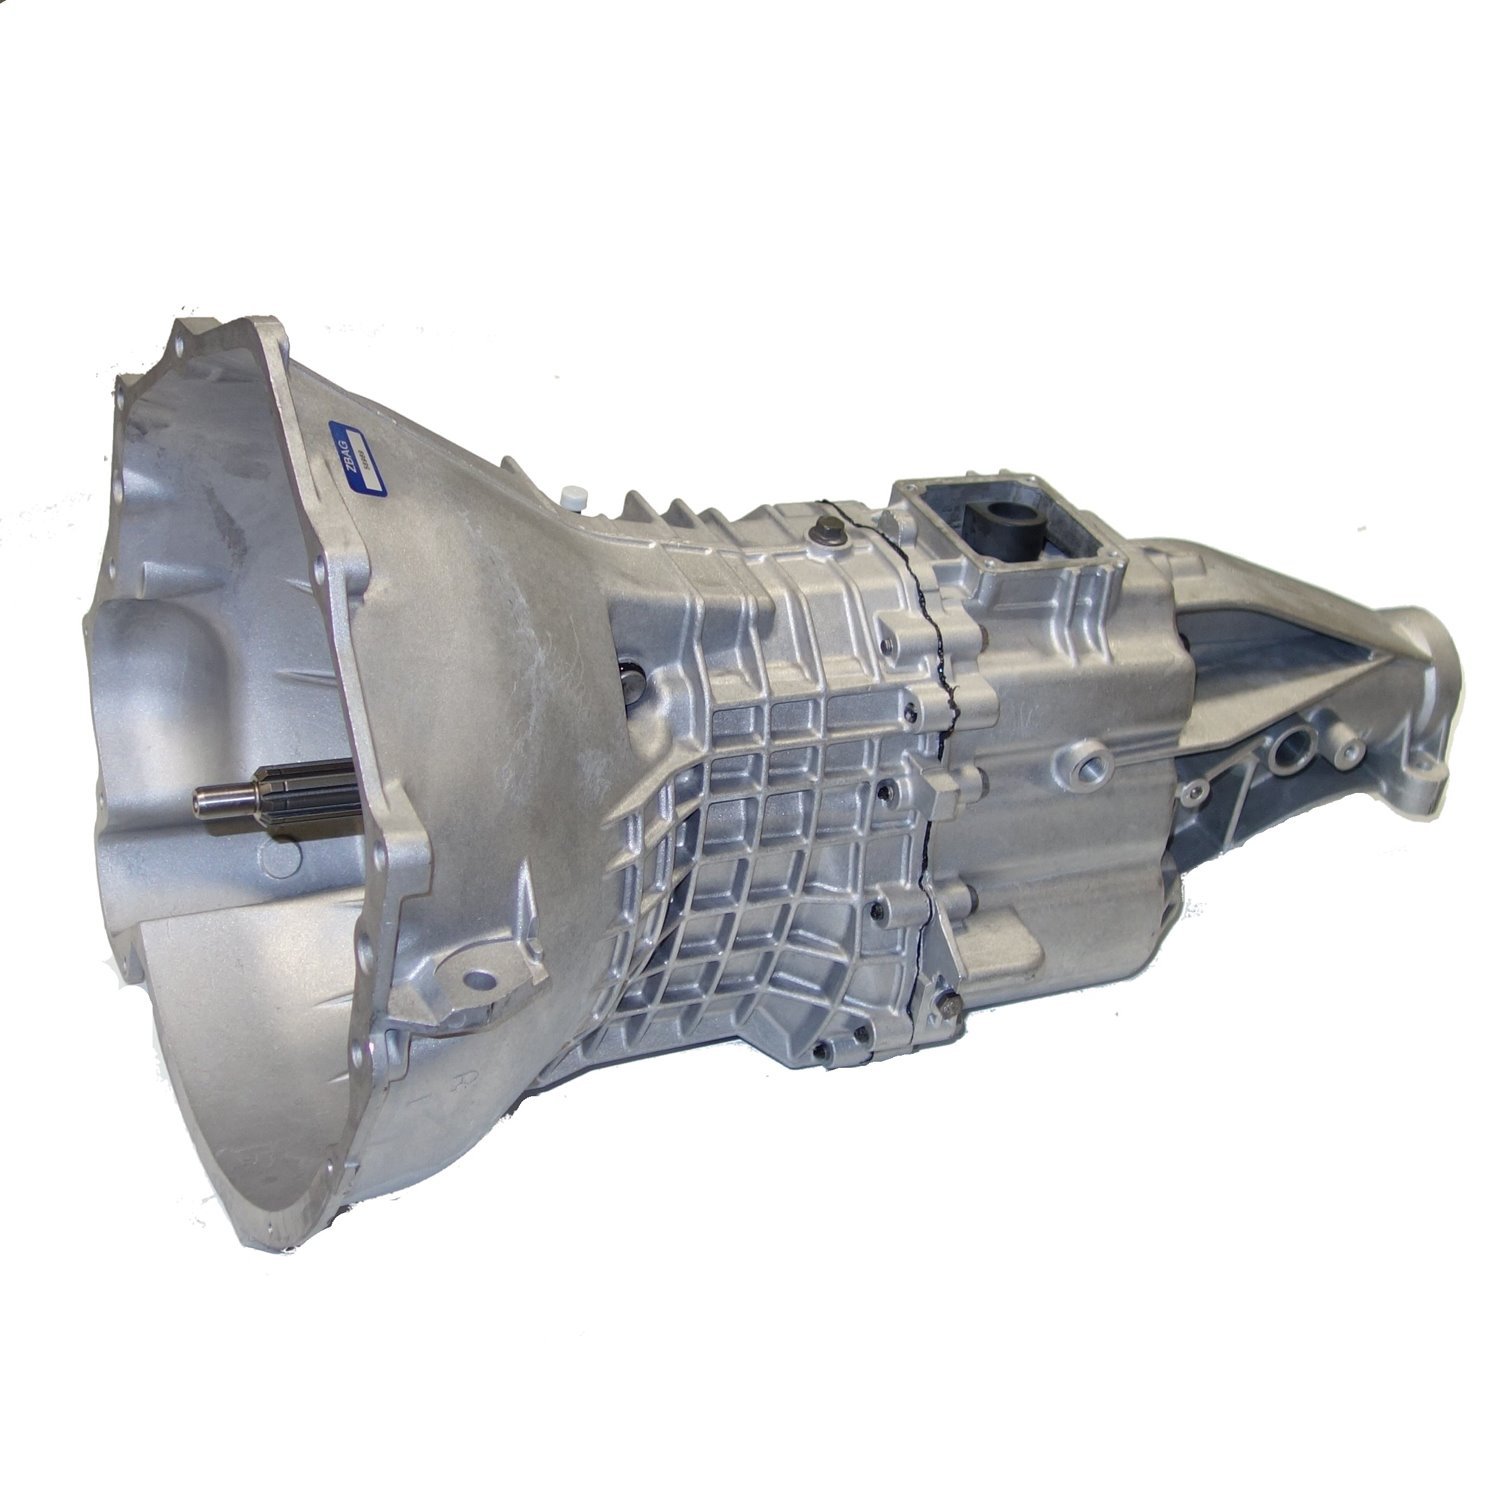 Remanufactured NV3500 Manual Transmission for GM 96-97 S10, S15 & Sonoma, 4.3L, 5 Speed